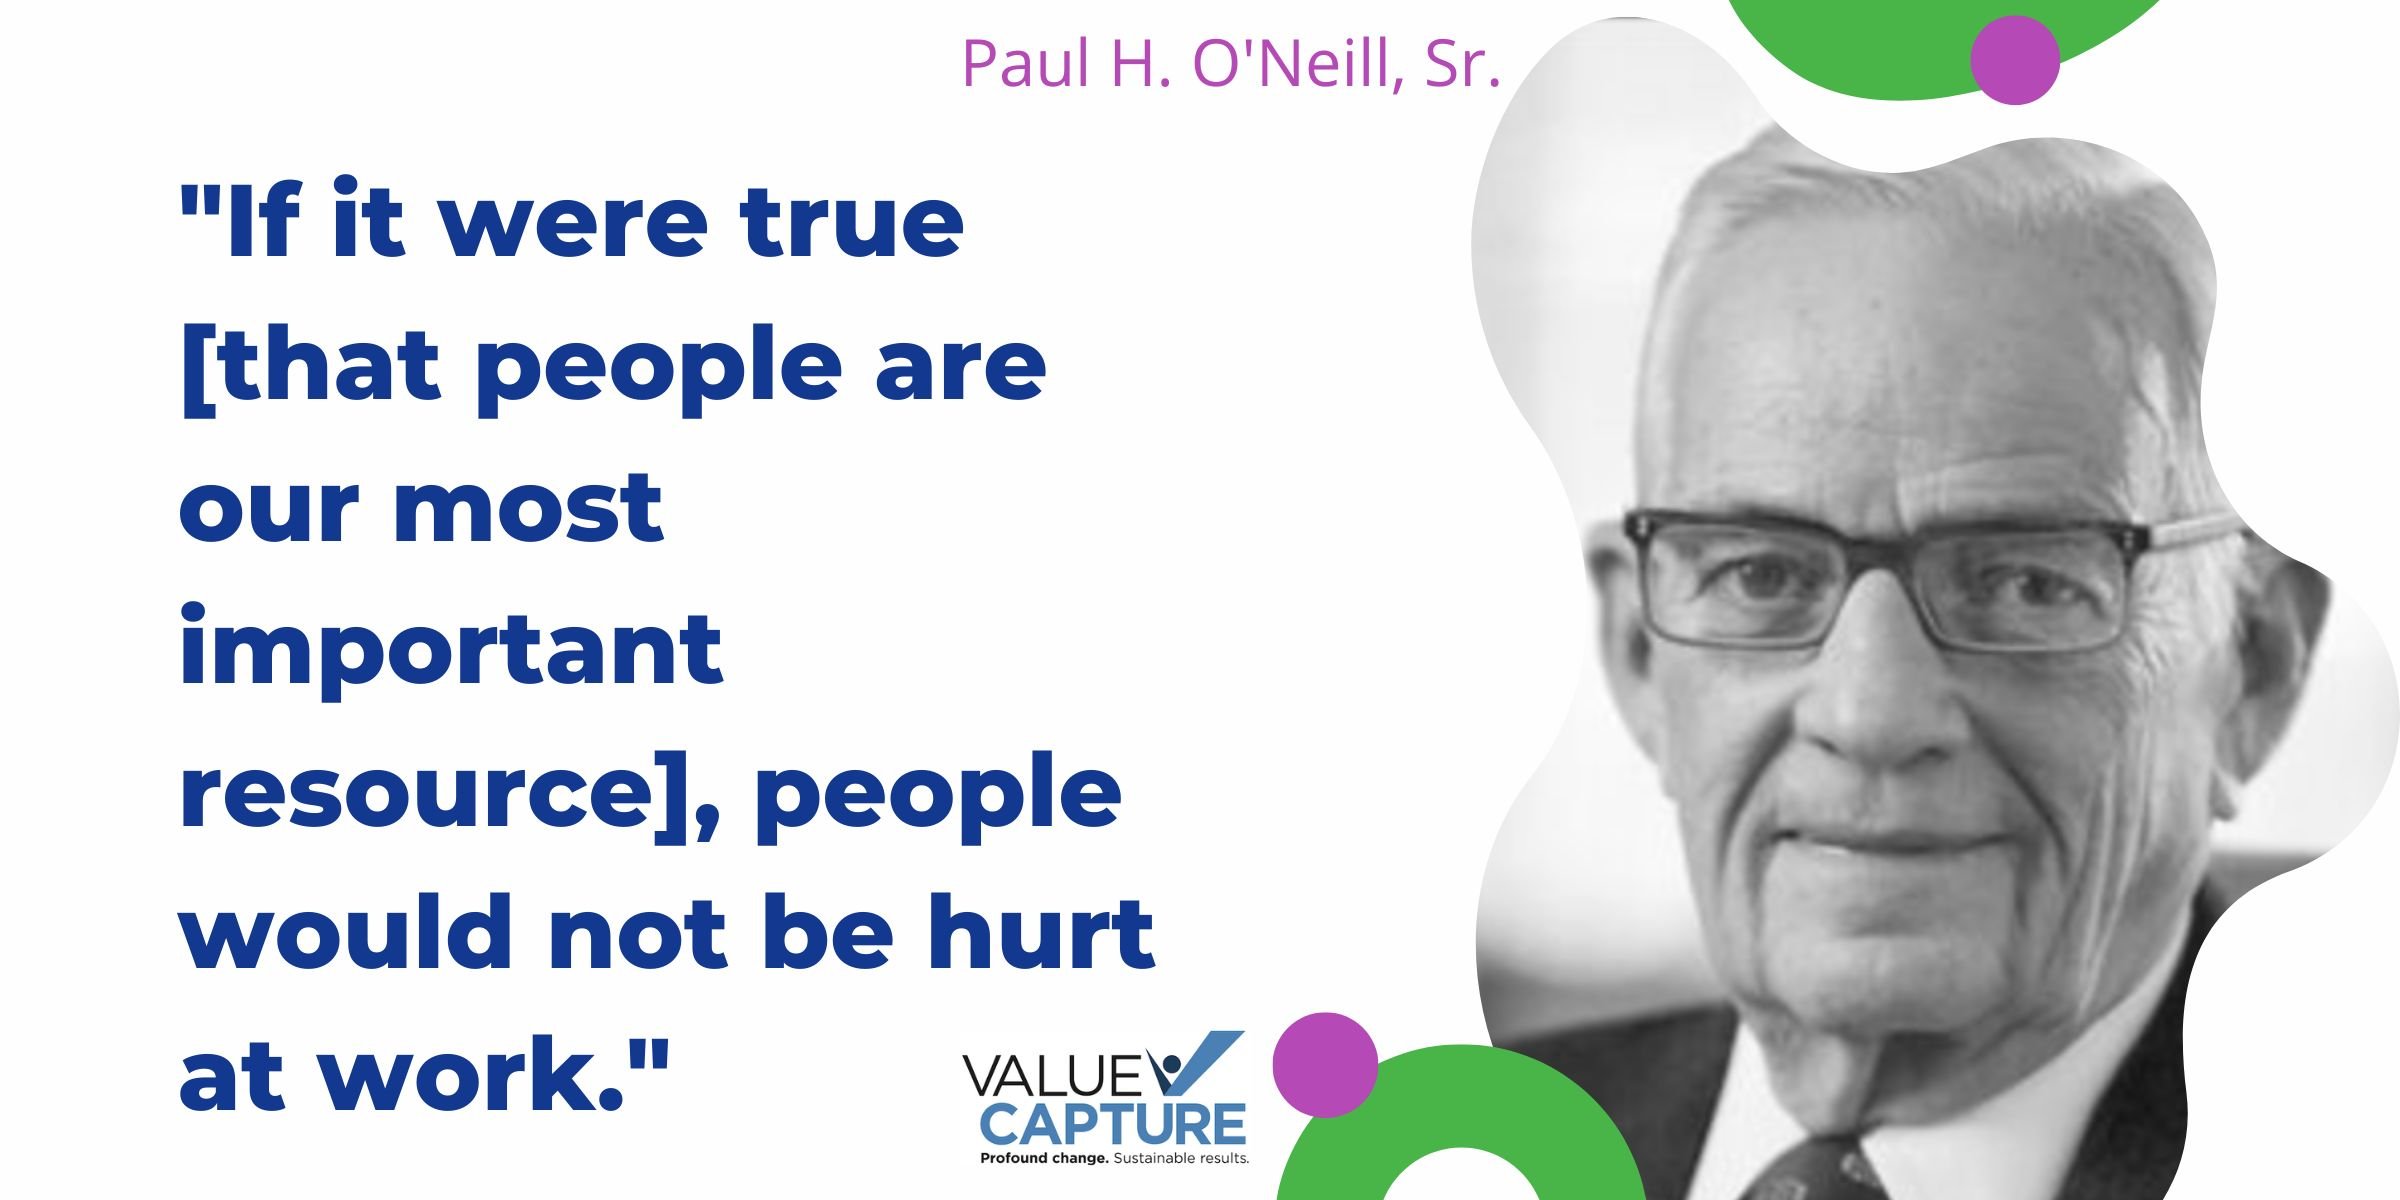 "If it were true [that people are our most important resource], people would not be hurt at work." Paul O'Neill